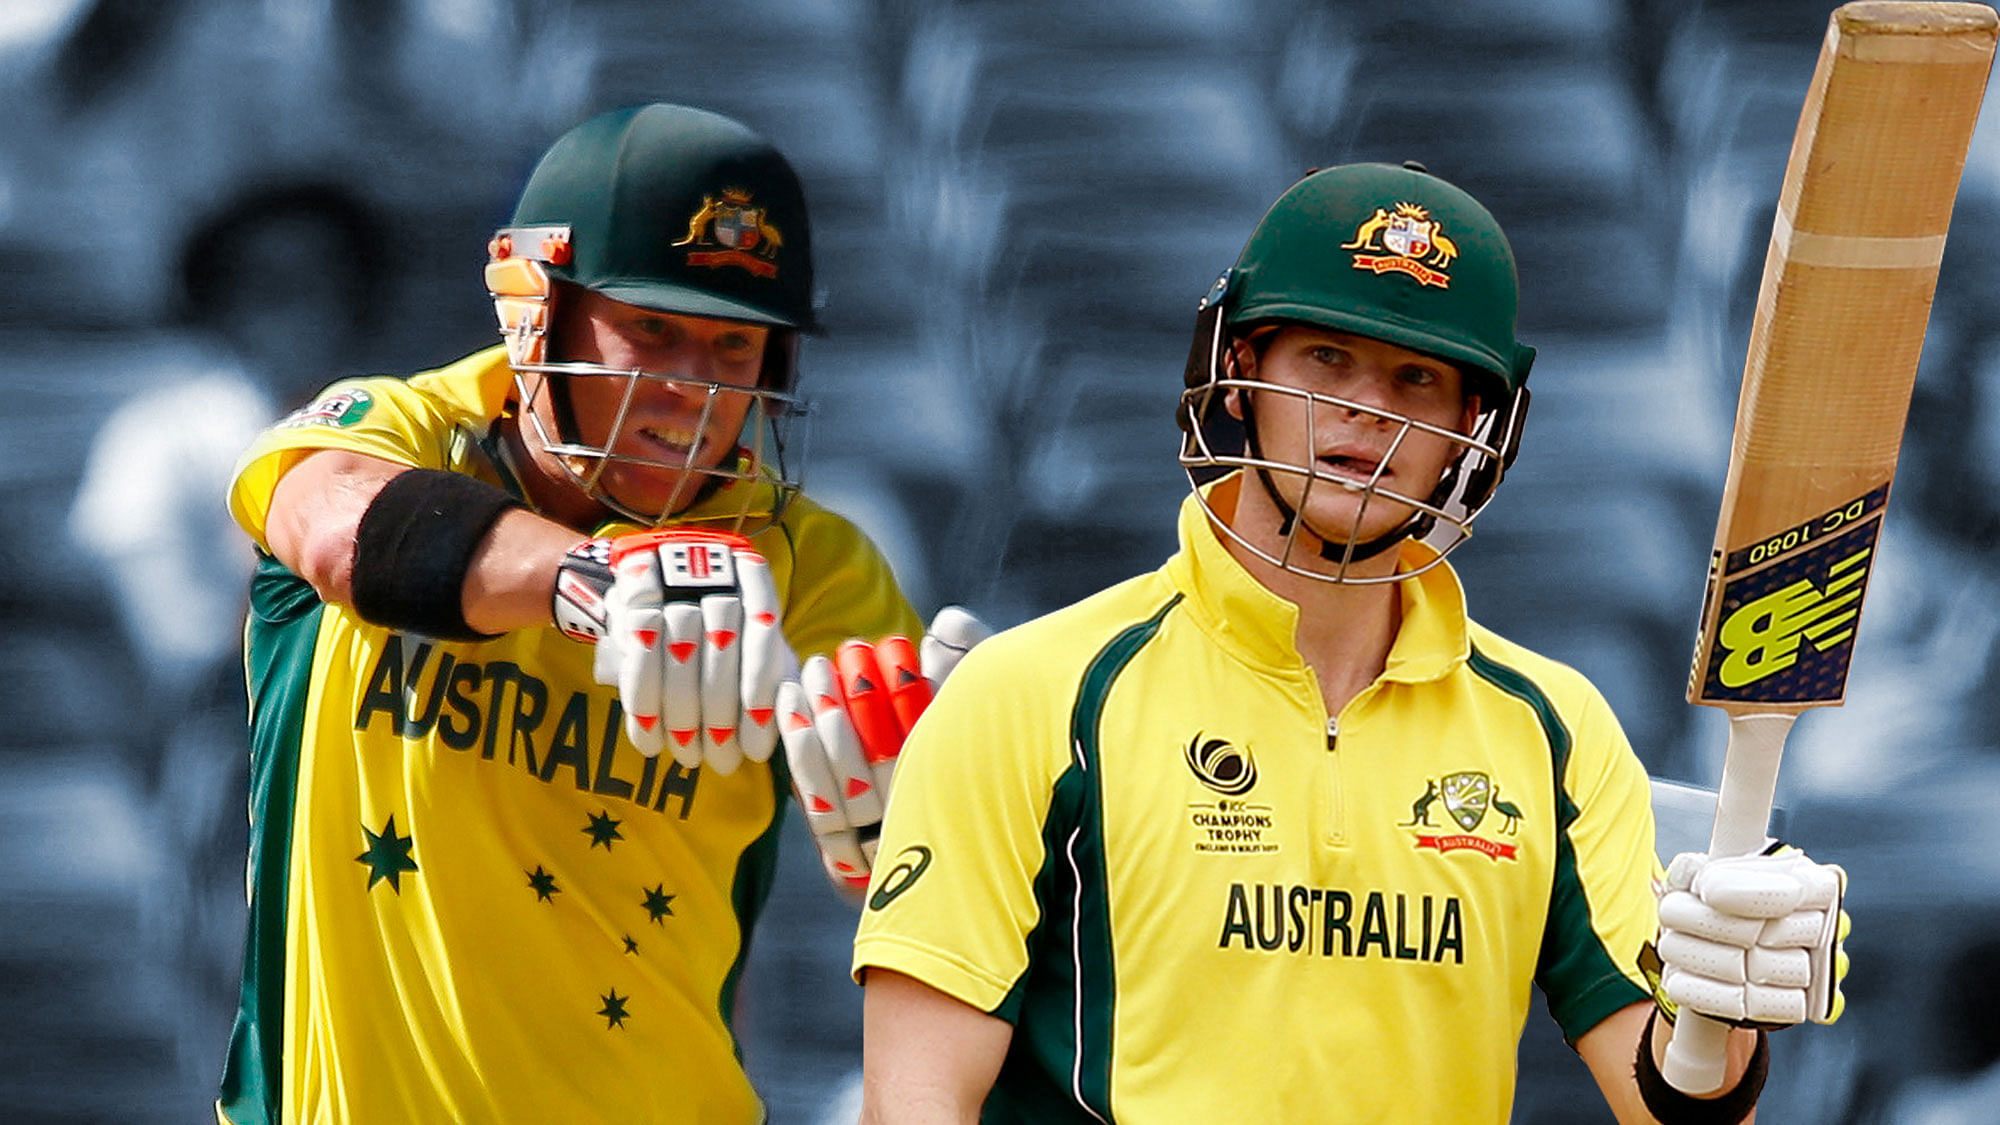 David Warner (L) and Steve Smith (R) have both been named in Australia’s World Cup squad.